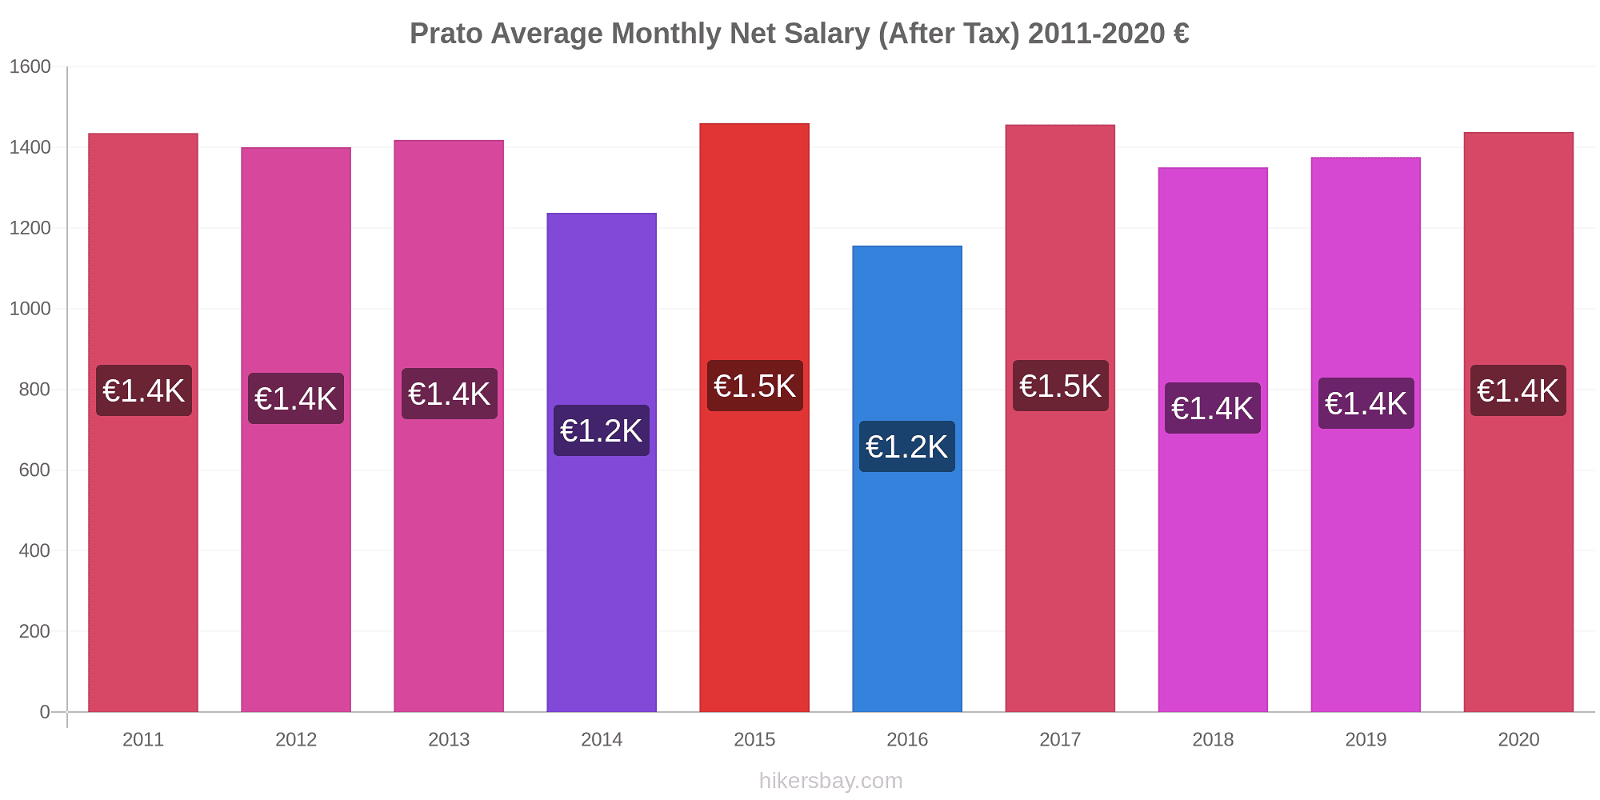 Prato price changes Average Monthly Net Salary (After Tax) hikersbay.com